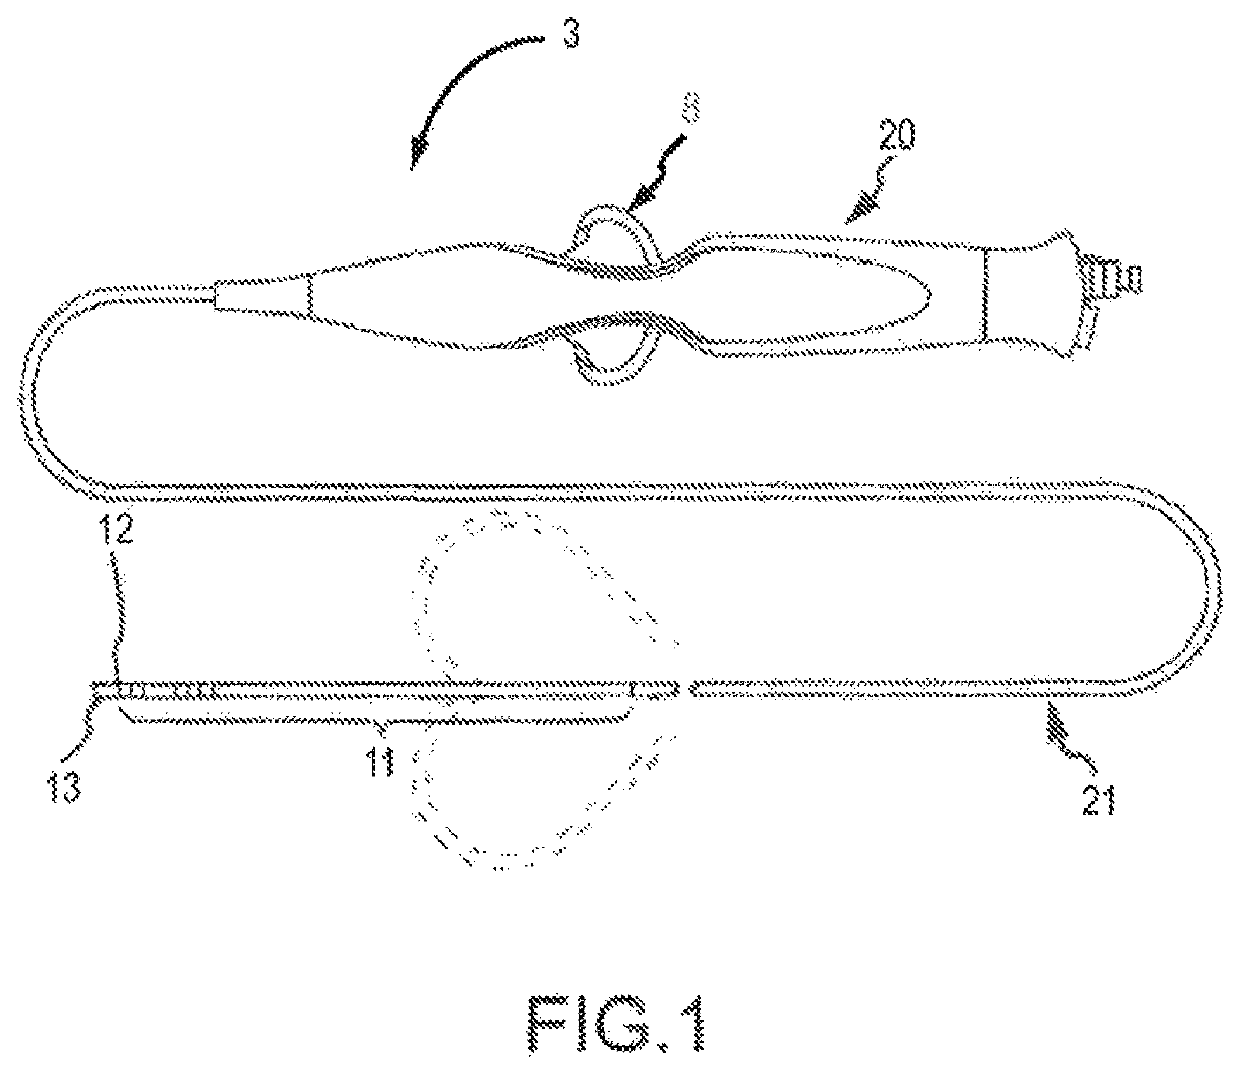 Deflectable catheter bodies with corrugated tubular structures